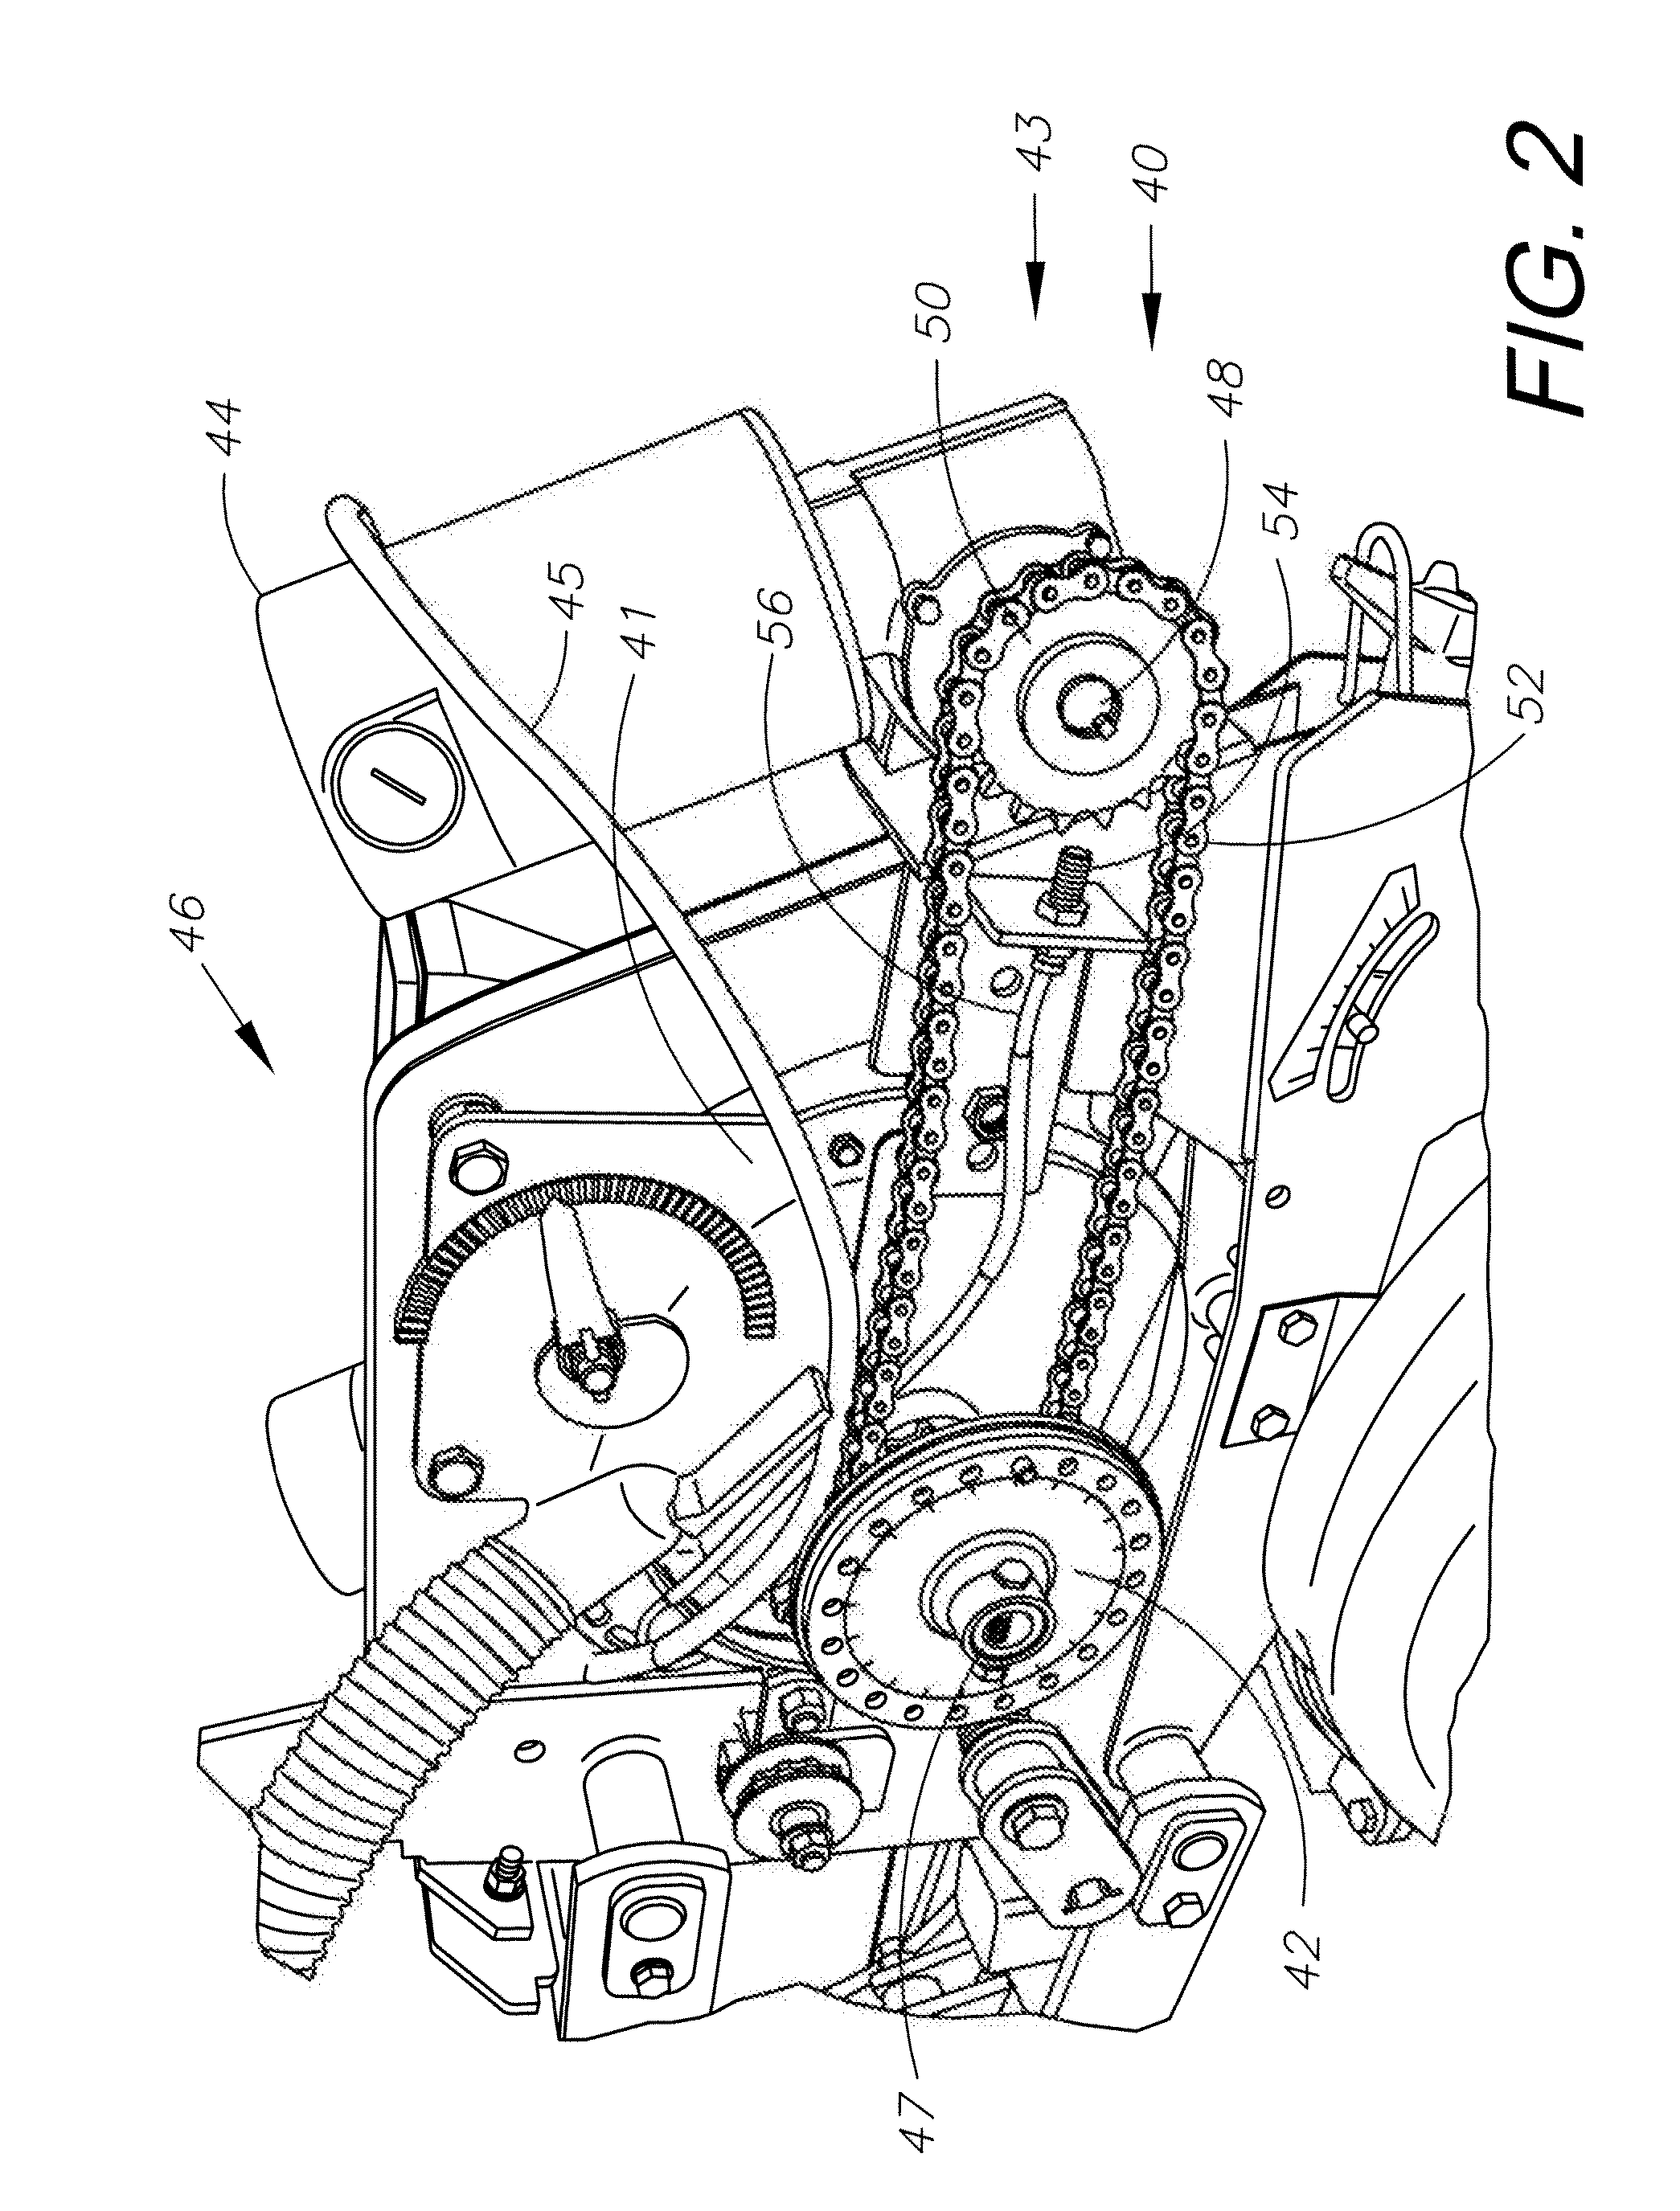 Method and apparatus for controlling seed population